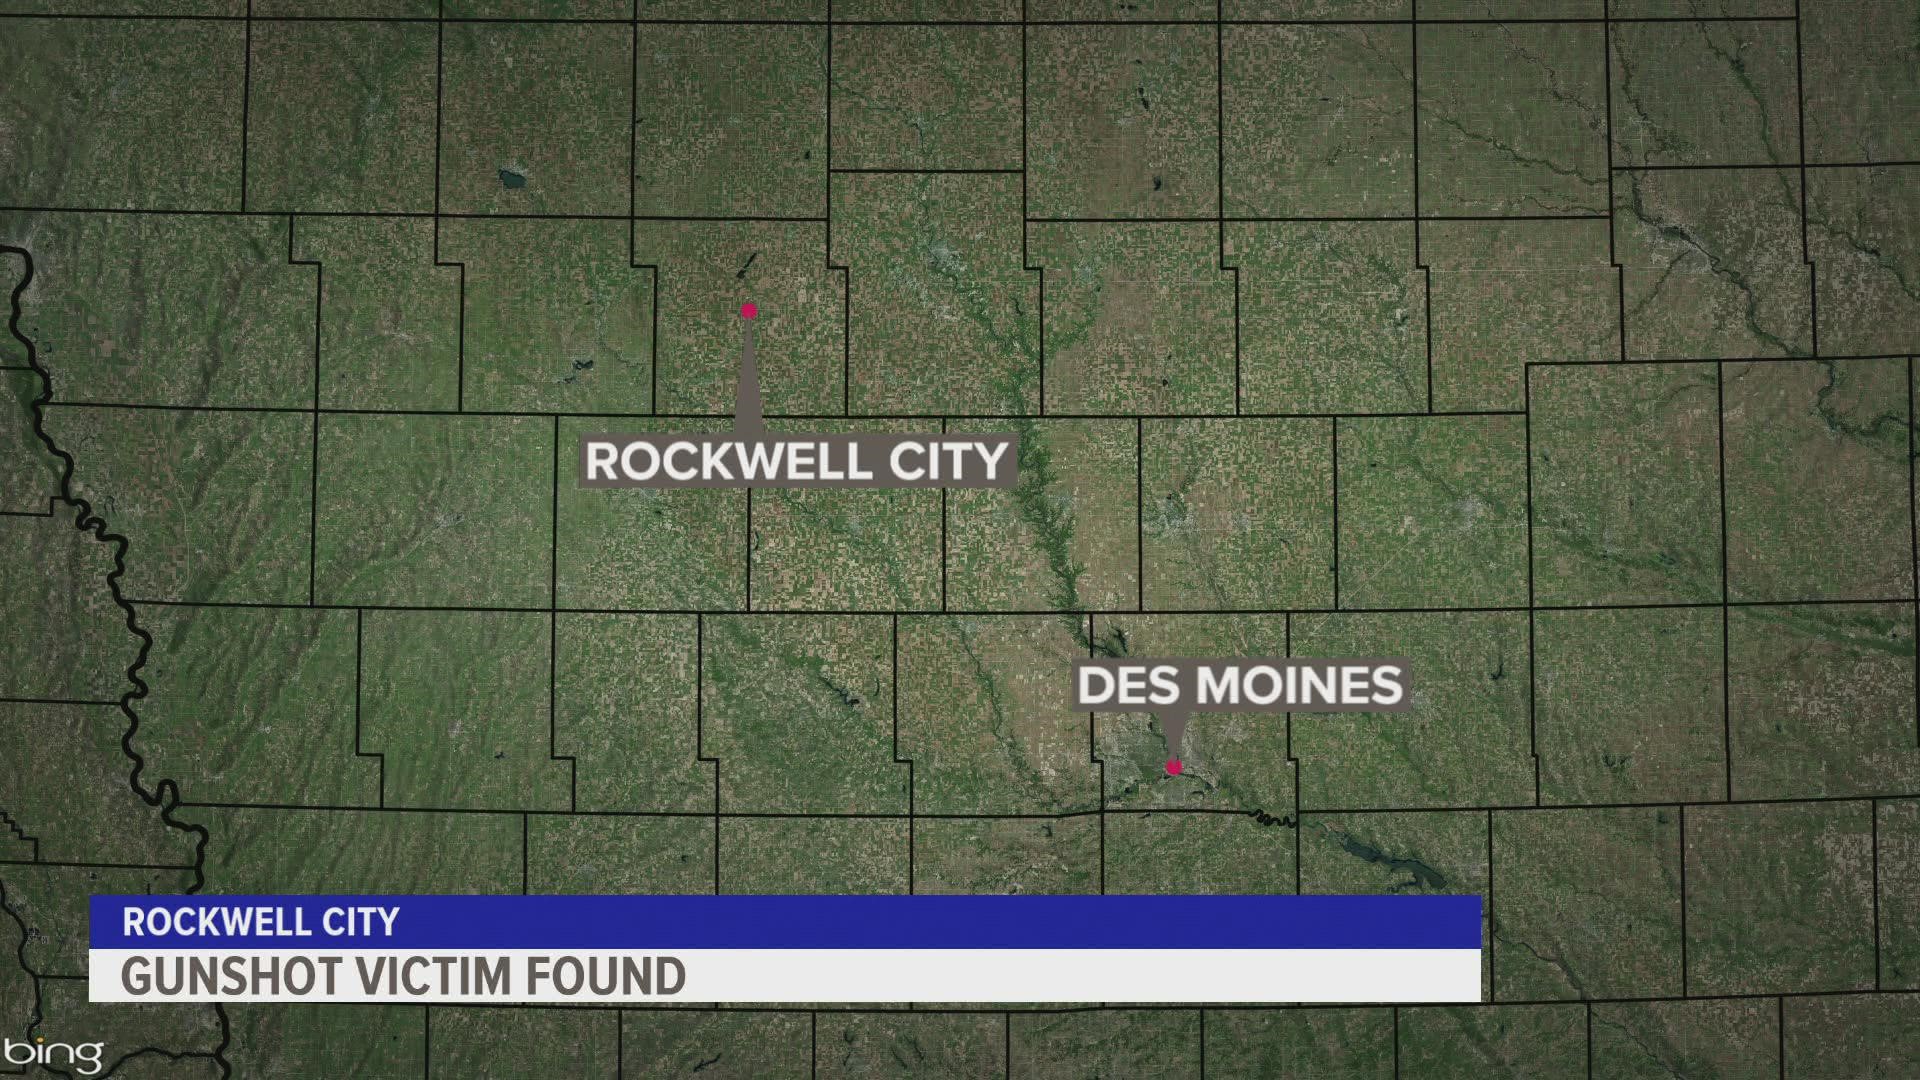 The man is in stable condition Wednesday, according to the Iowa Division of Criminal Investigation.